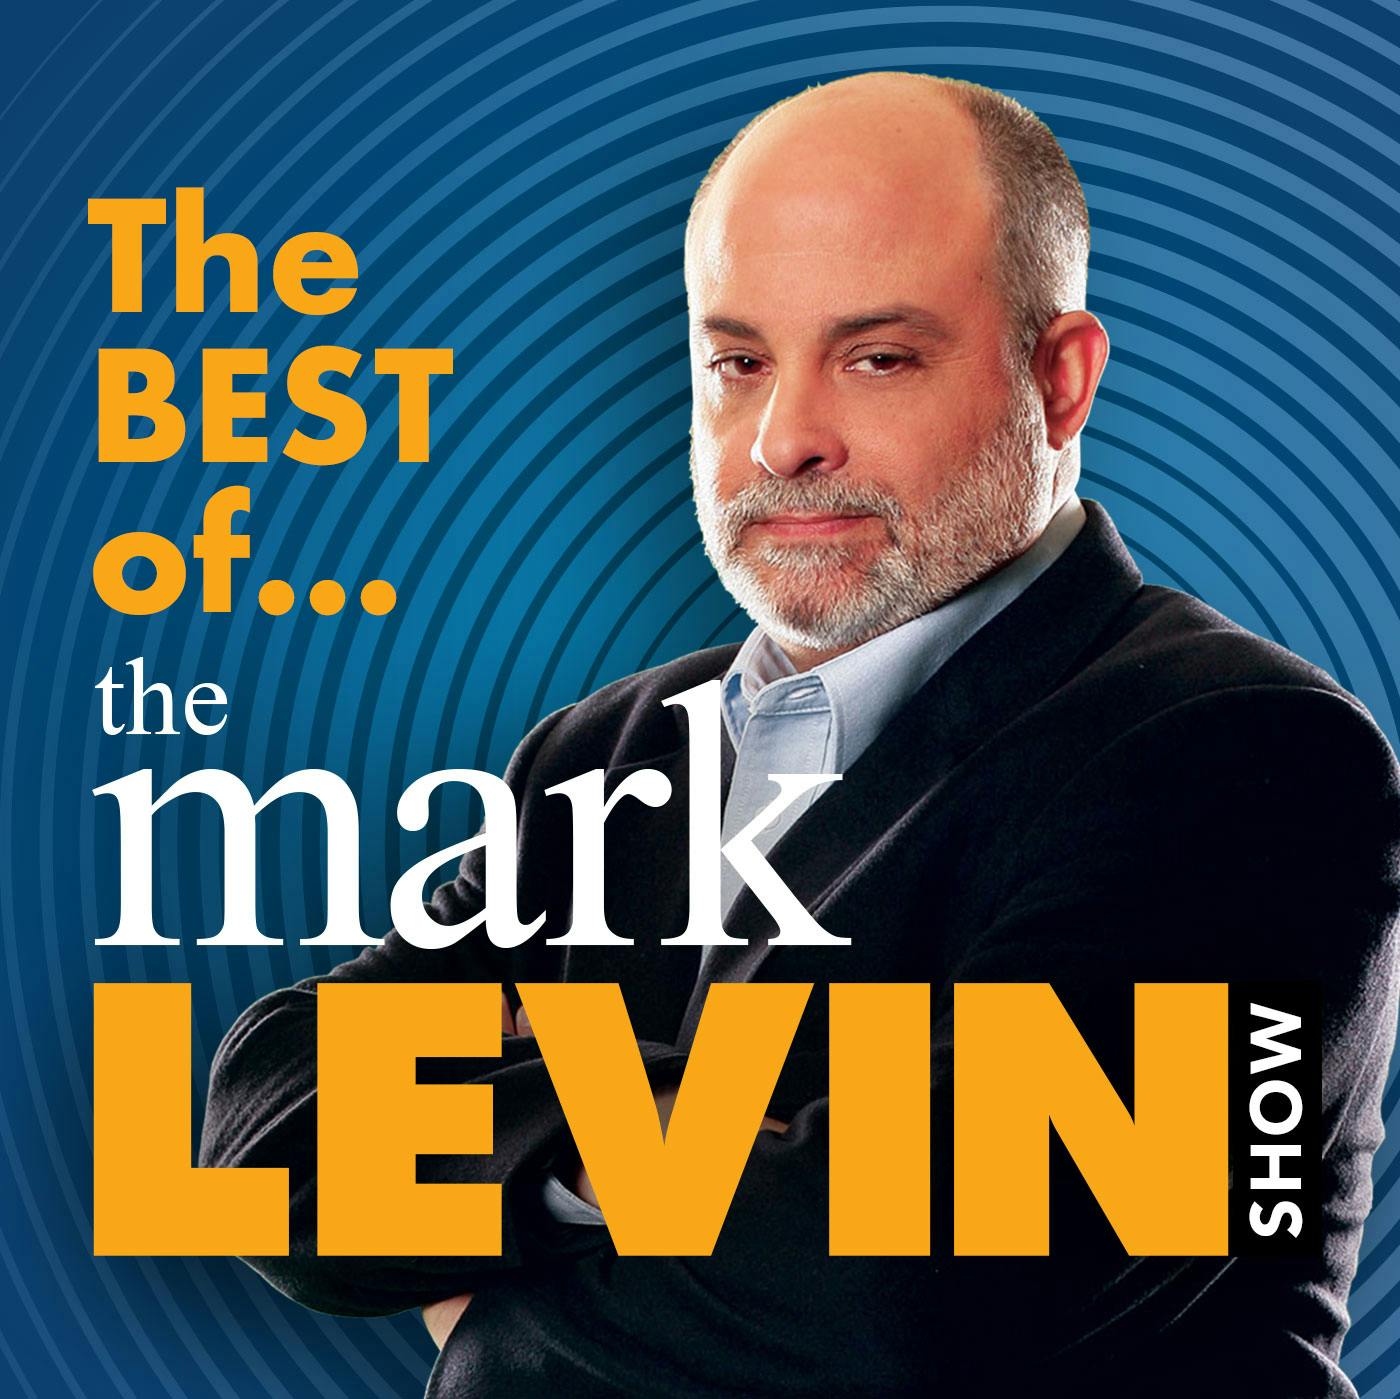 The Best Of Mark Levin - 9/16/23